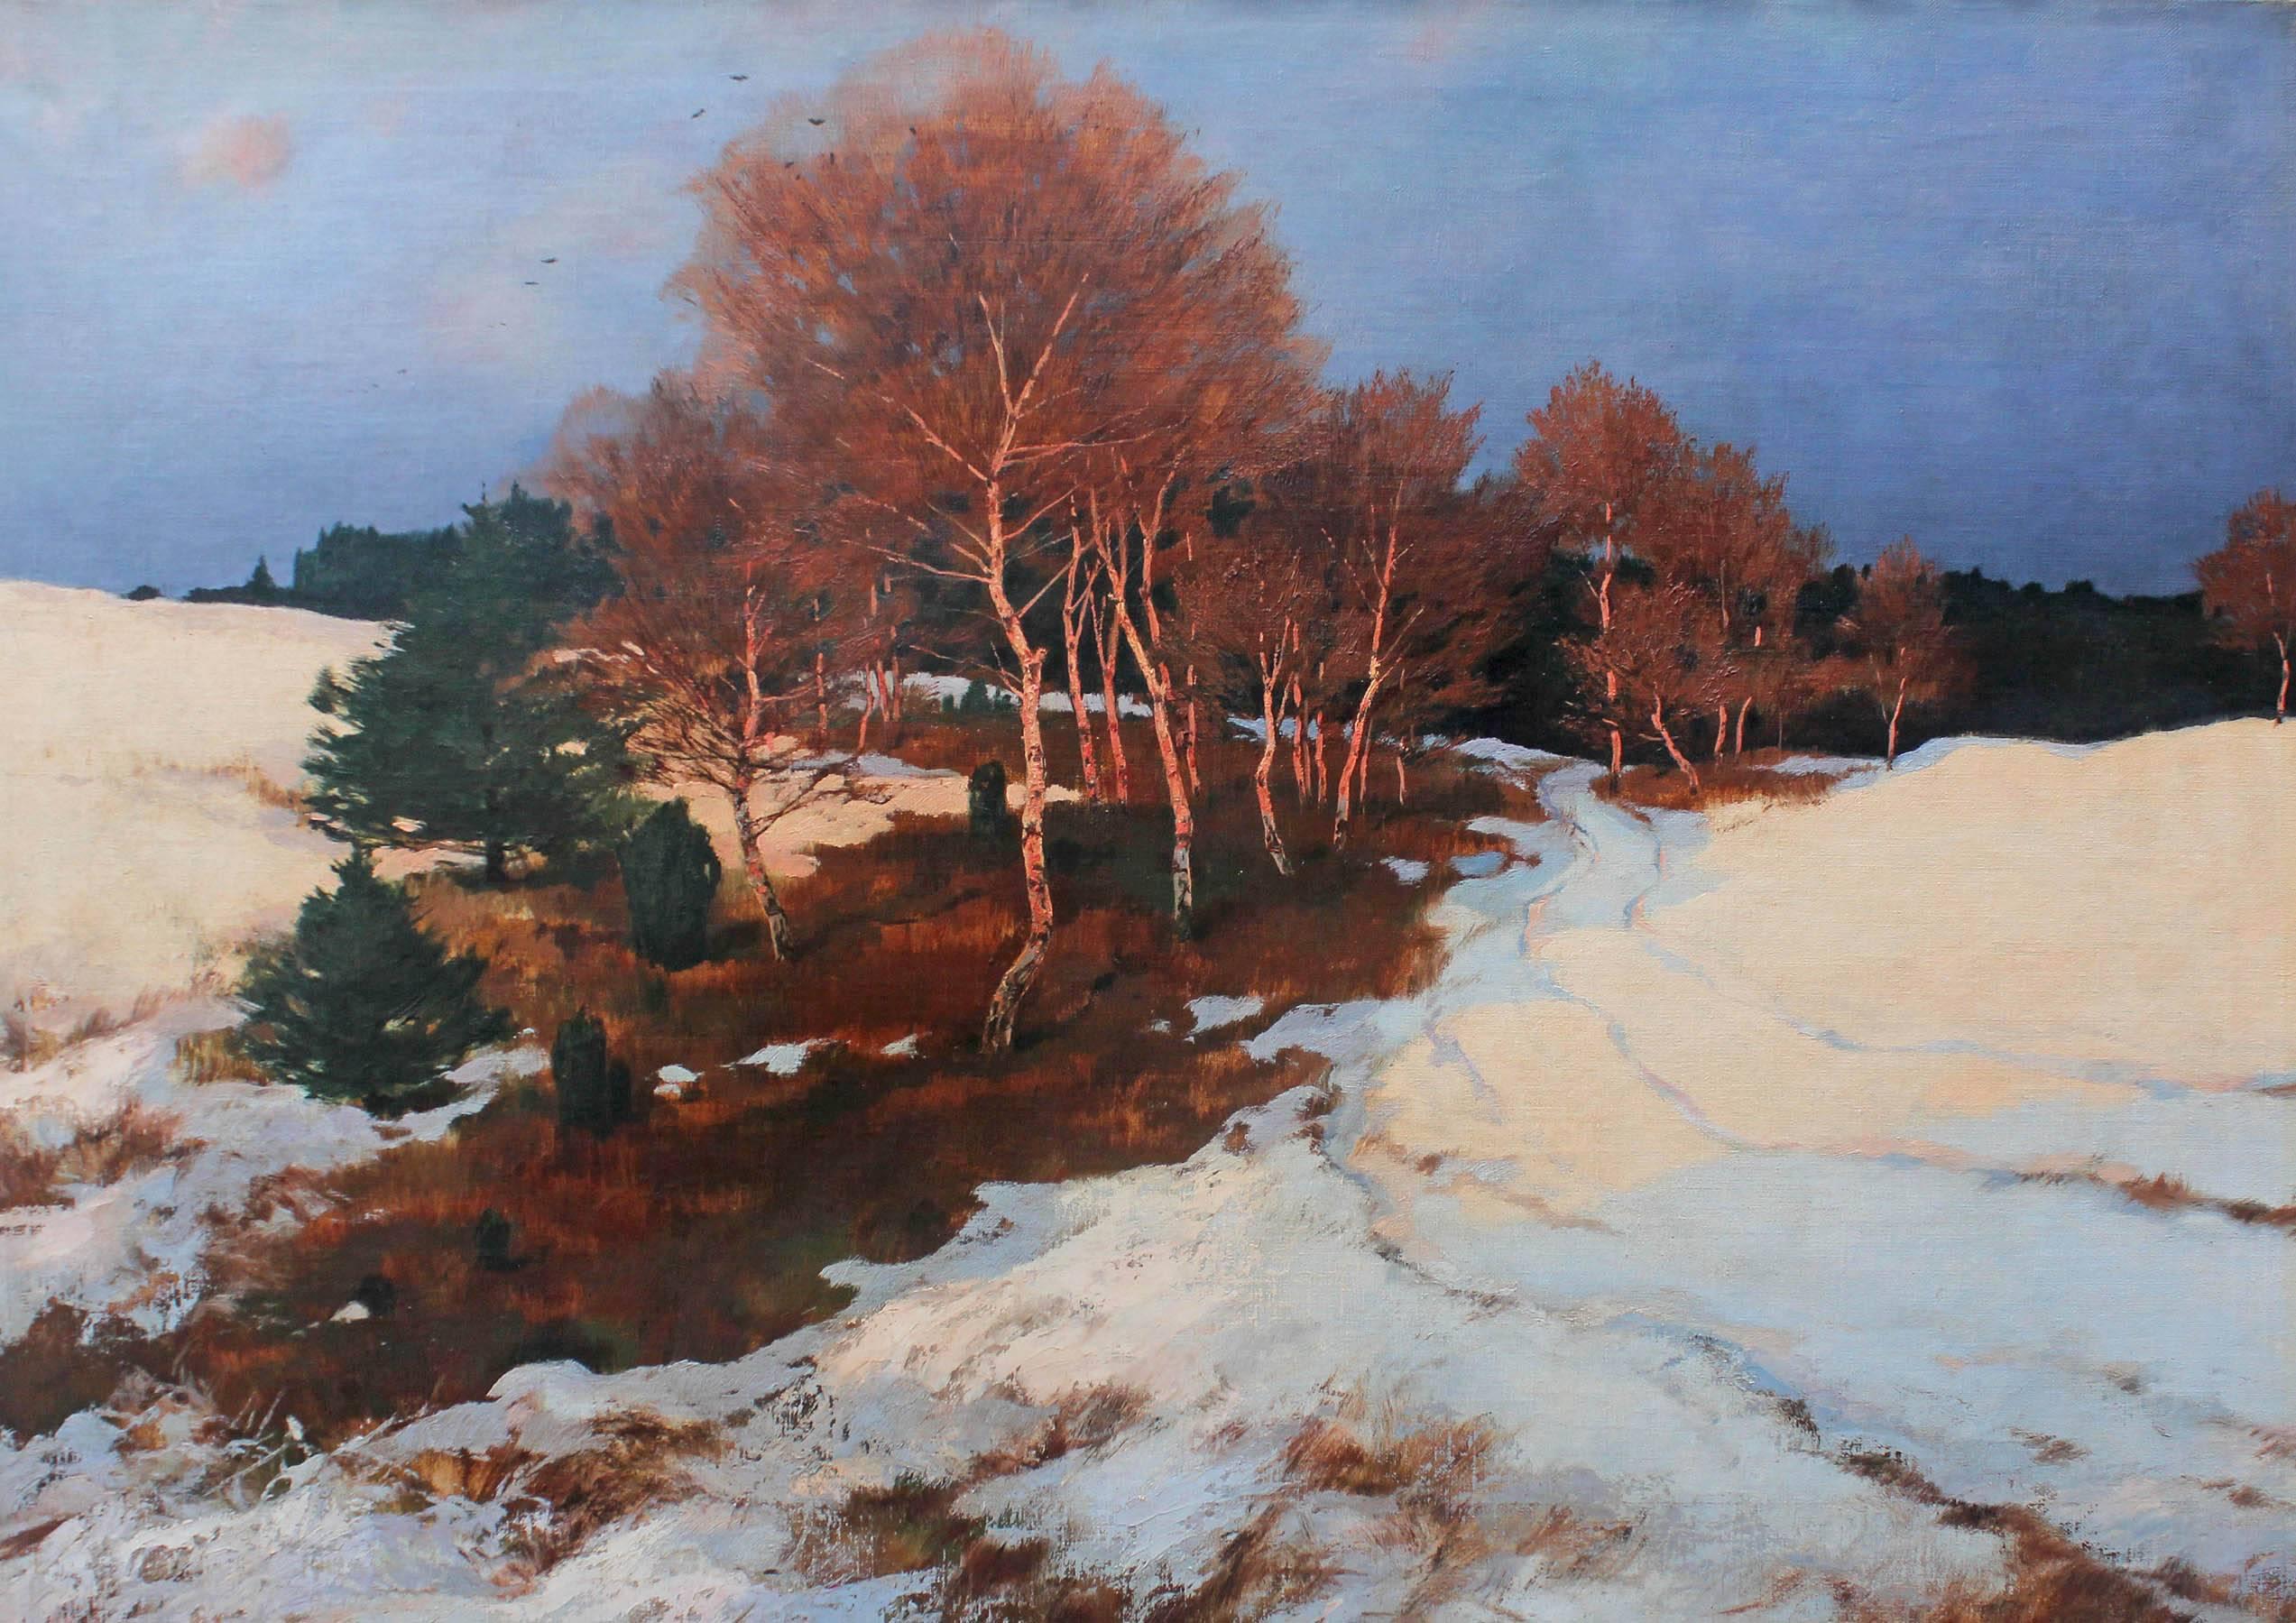 A large dramatic impressionist oil painting of sunlit birch trees with a vivid blue sky. Painted by Rudolf Hermanns. Oil on canvas, circa 1920. Unframed.
Hermanns was born in 1860 the son of the actress Clara Behrens (1840-?) and the opera singer